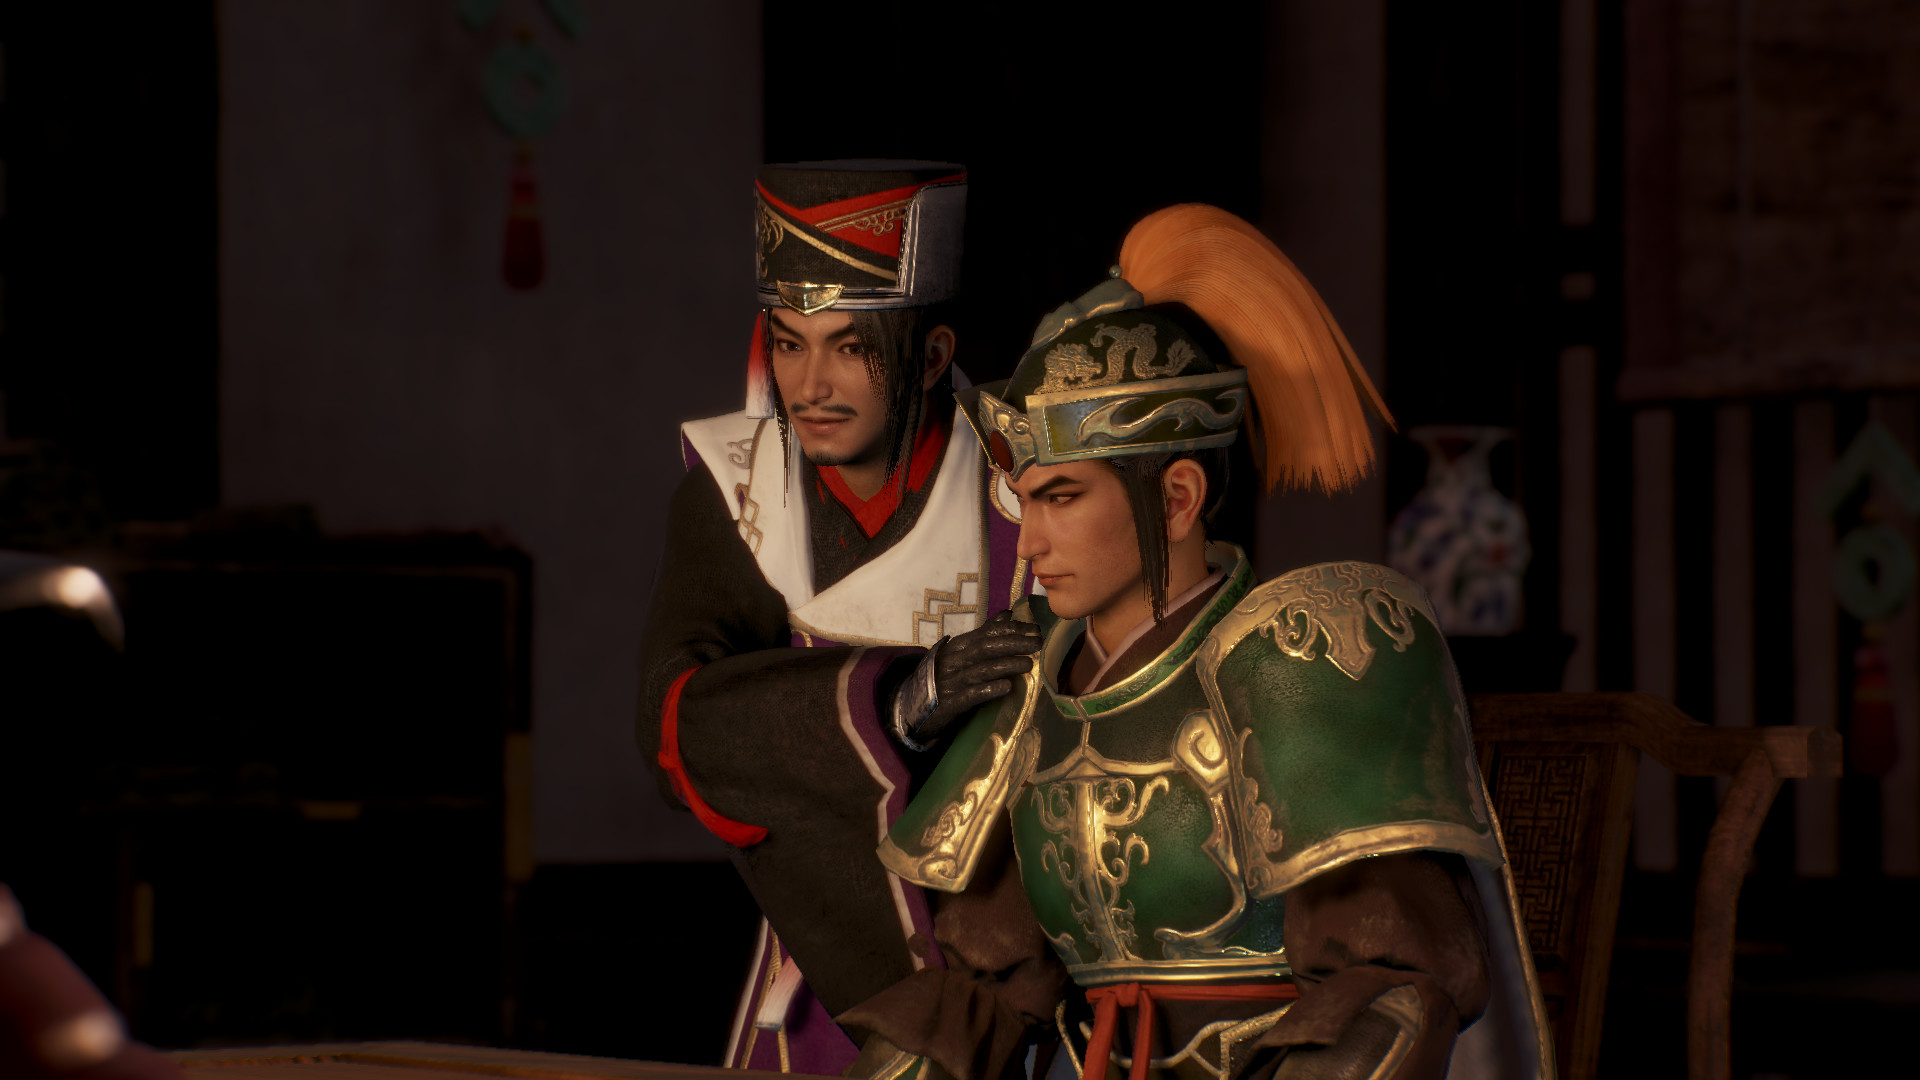 DYNASTY WARRIORS 9: Chen Gong "Additional Hypothetical Scenarios Set" / 陳宮「追加ＩＦシナリオセット」 Featured Screenshot #1